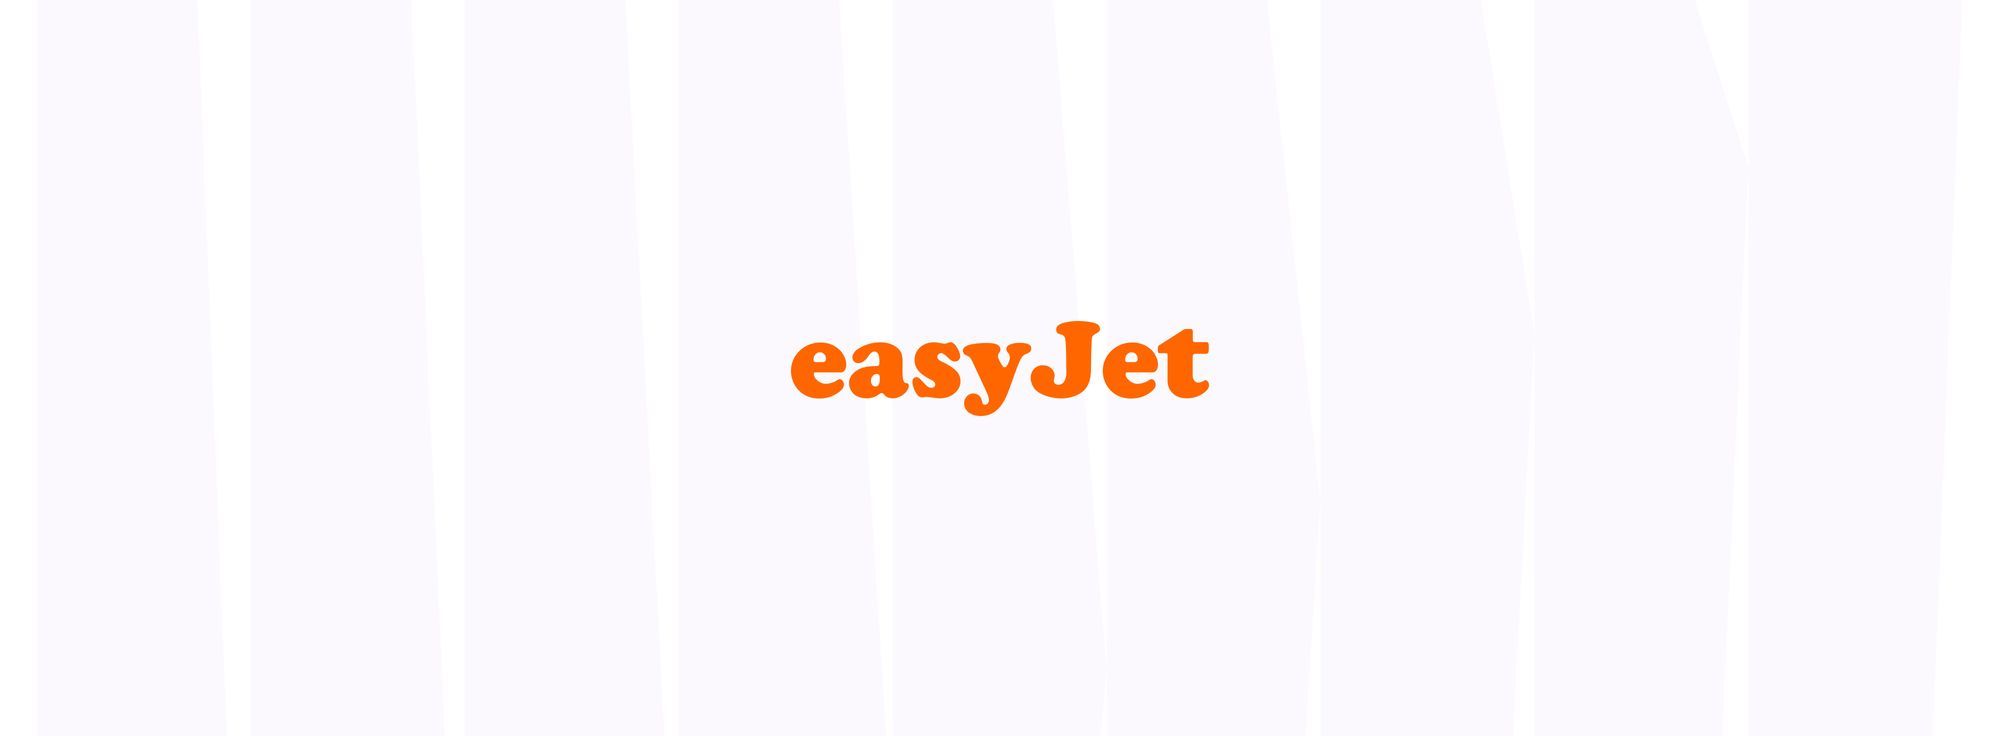 easyJet, Europe’s leading airline, is live on Duffel